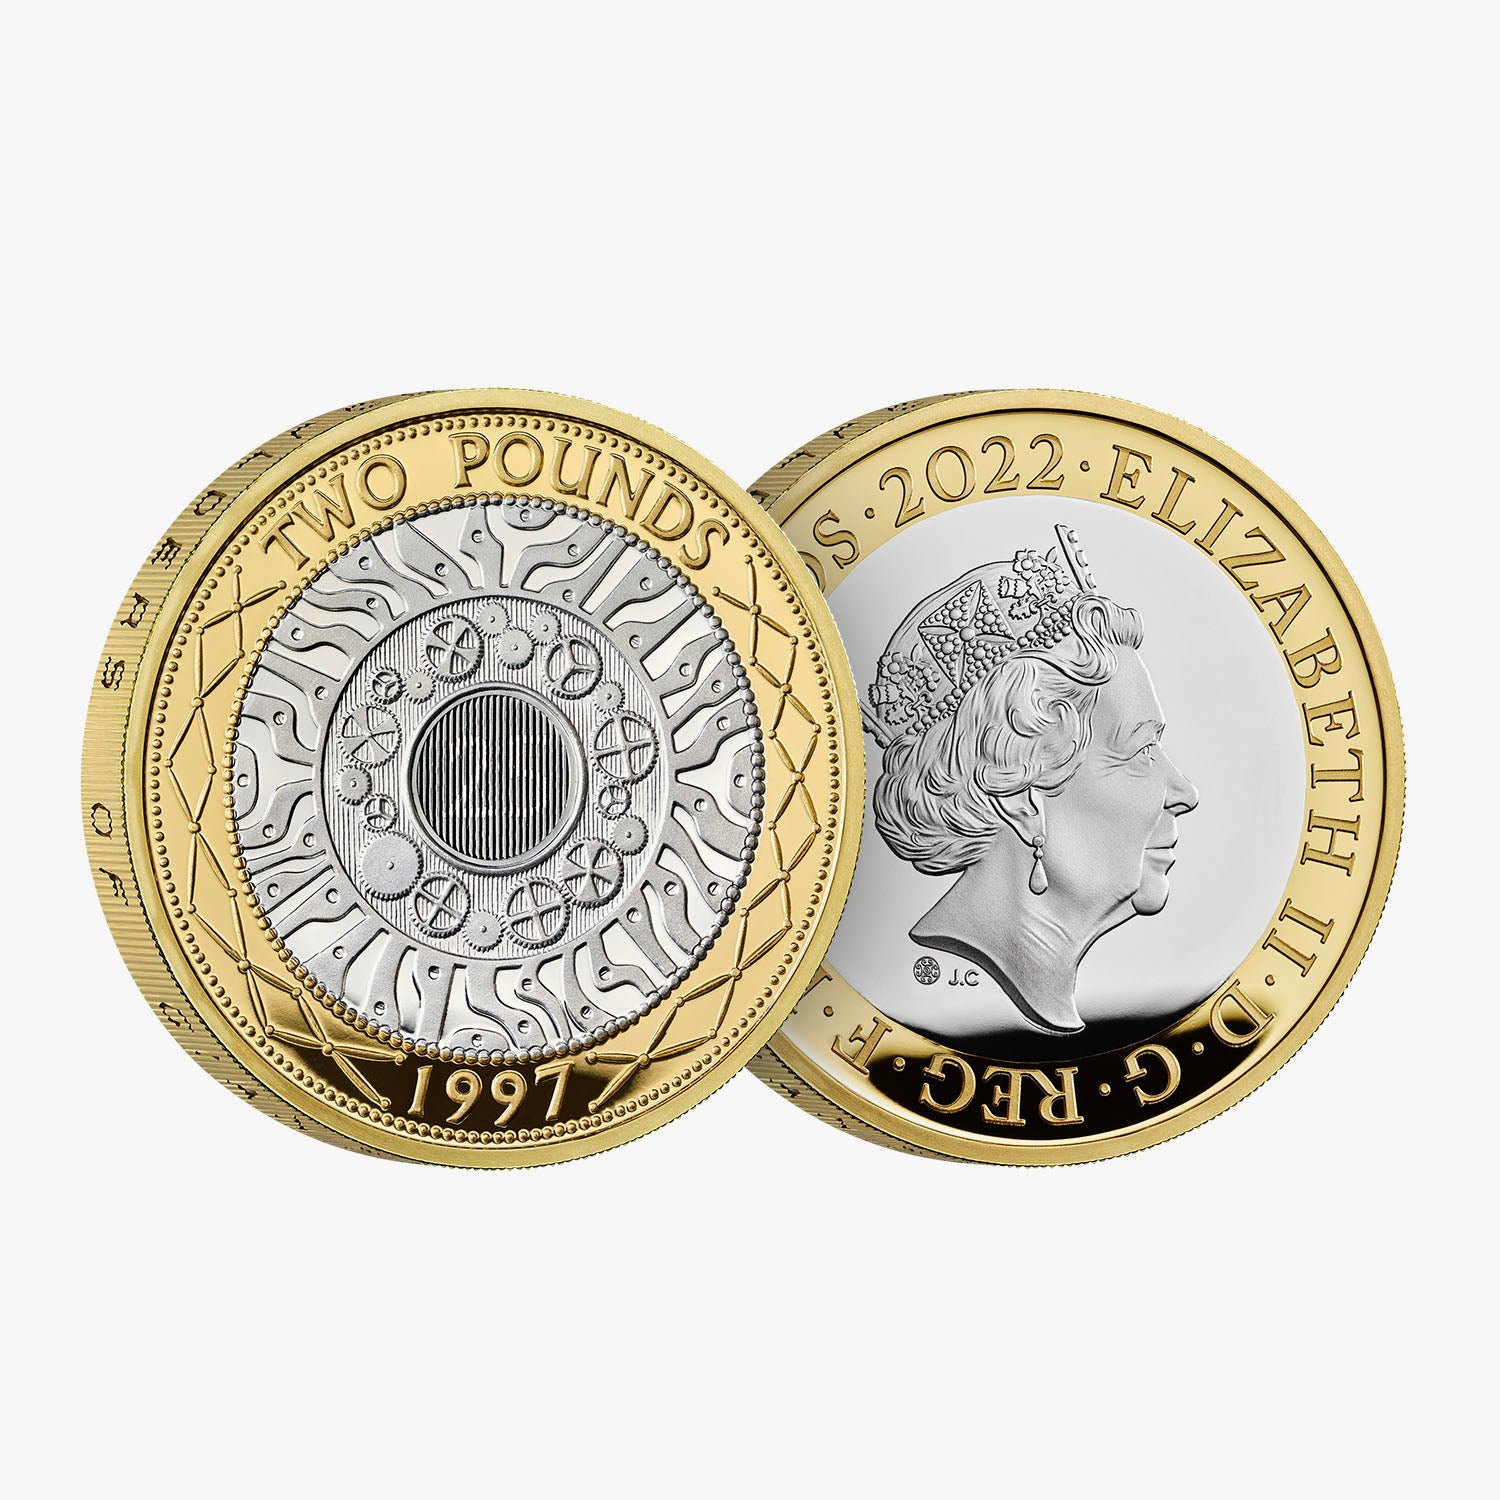 Celebrating 25 Years of the £2 2022 UK £2 Silver Proof Coin